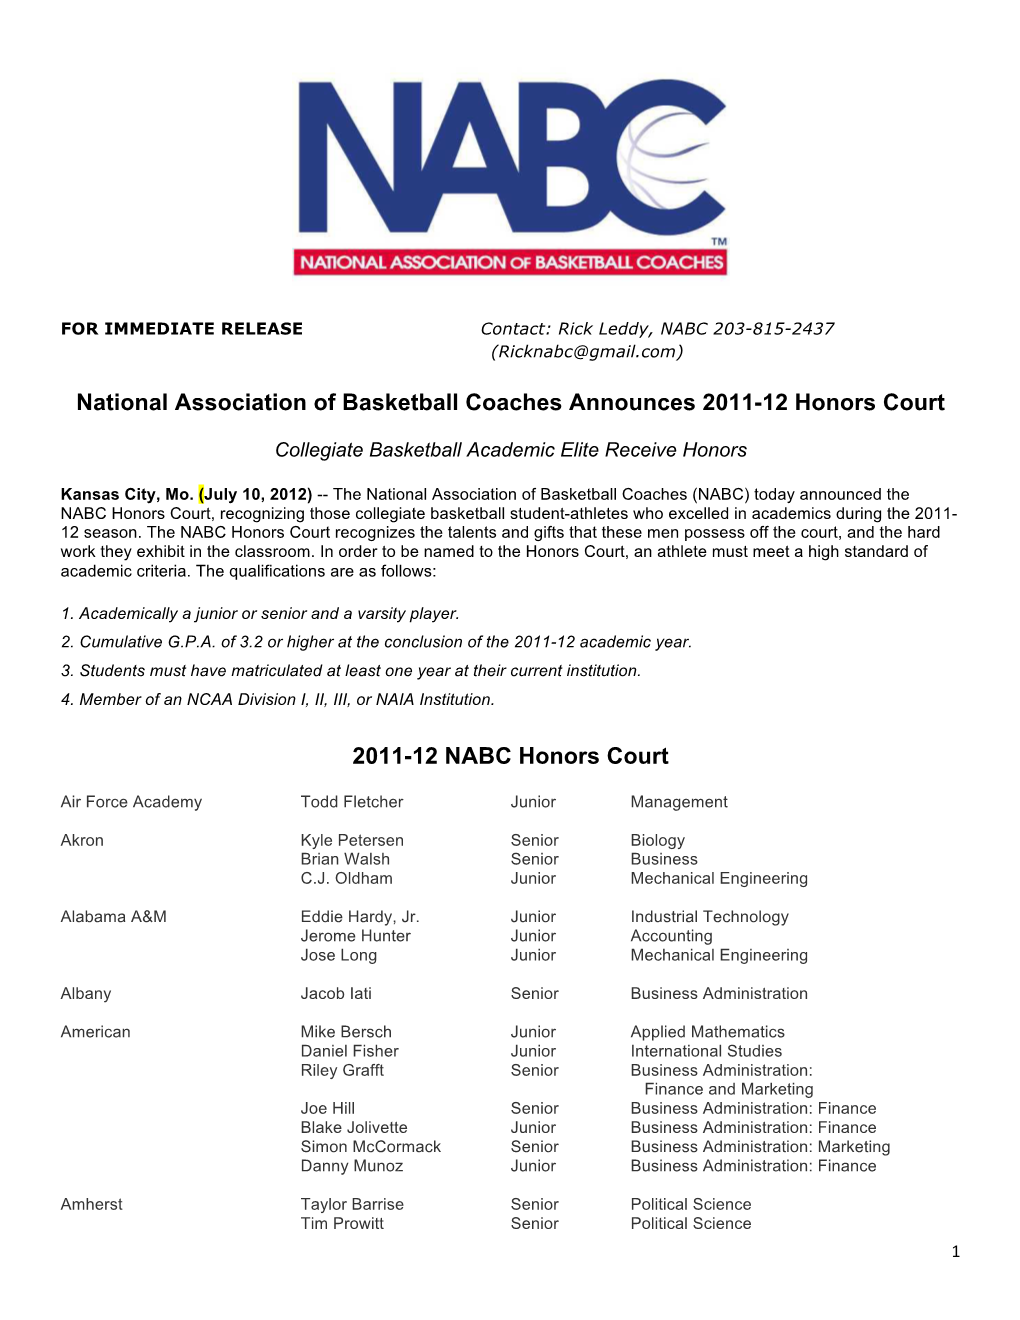 National Association of Basketball Coaches Announces 2011-12 Honors Court